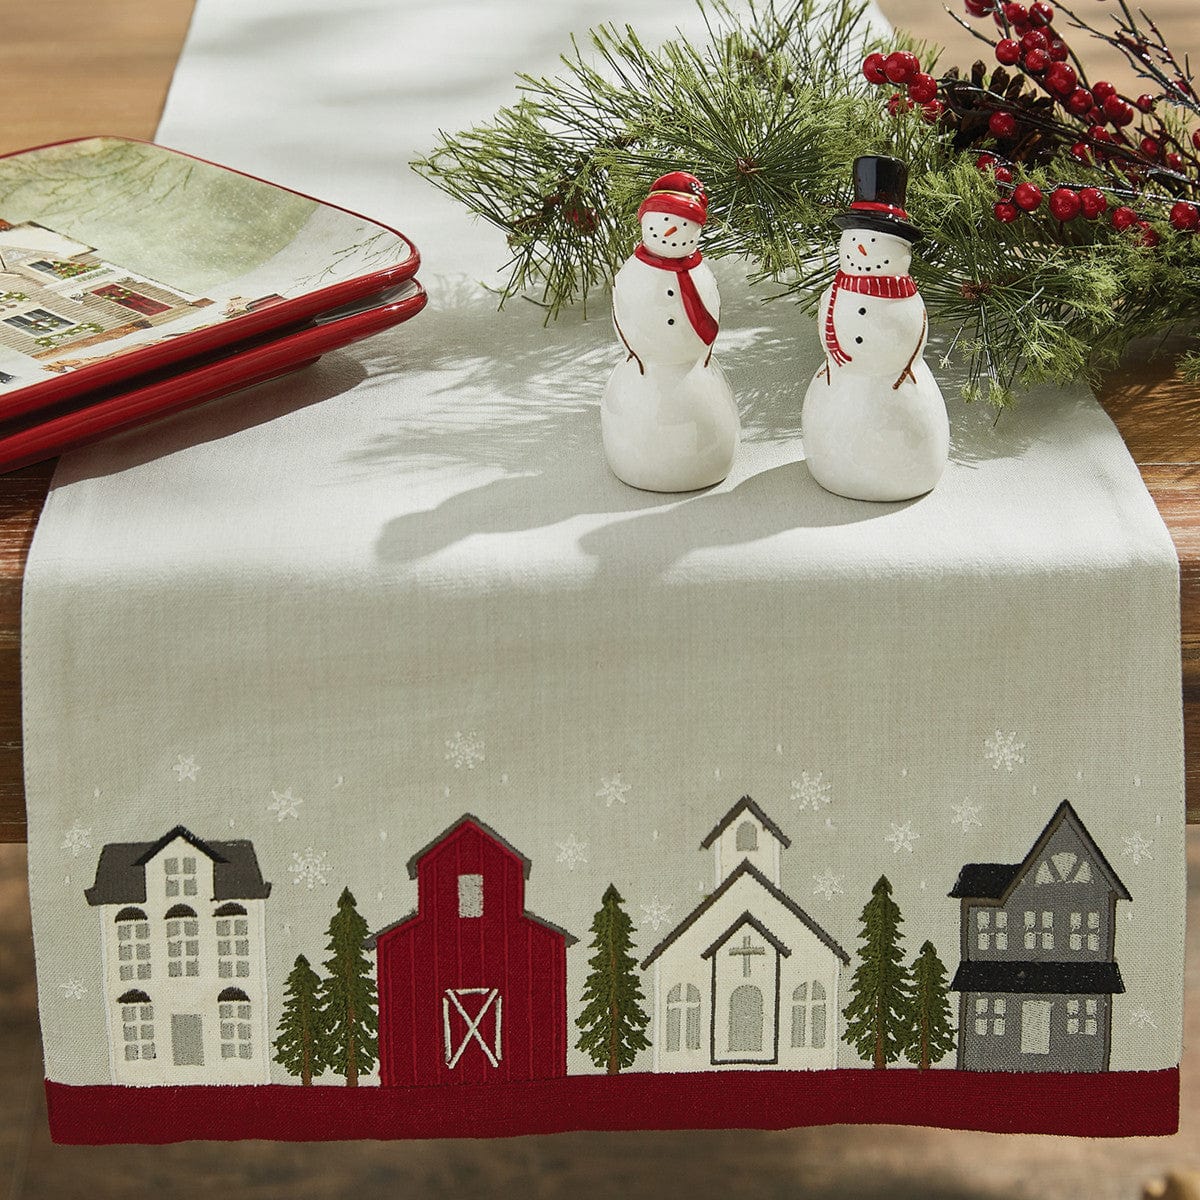 Town Square Appliqued & Embroidered Village Table Runner 42" Long-Park Designs-The Village Merchant